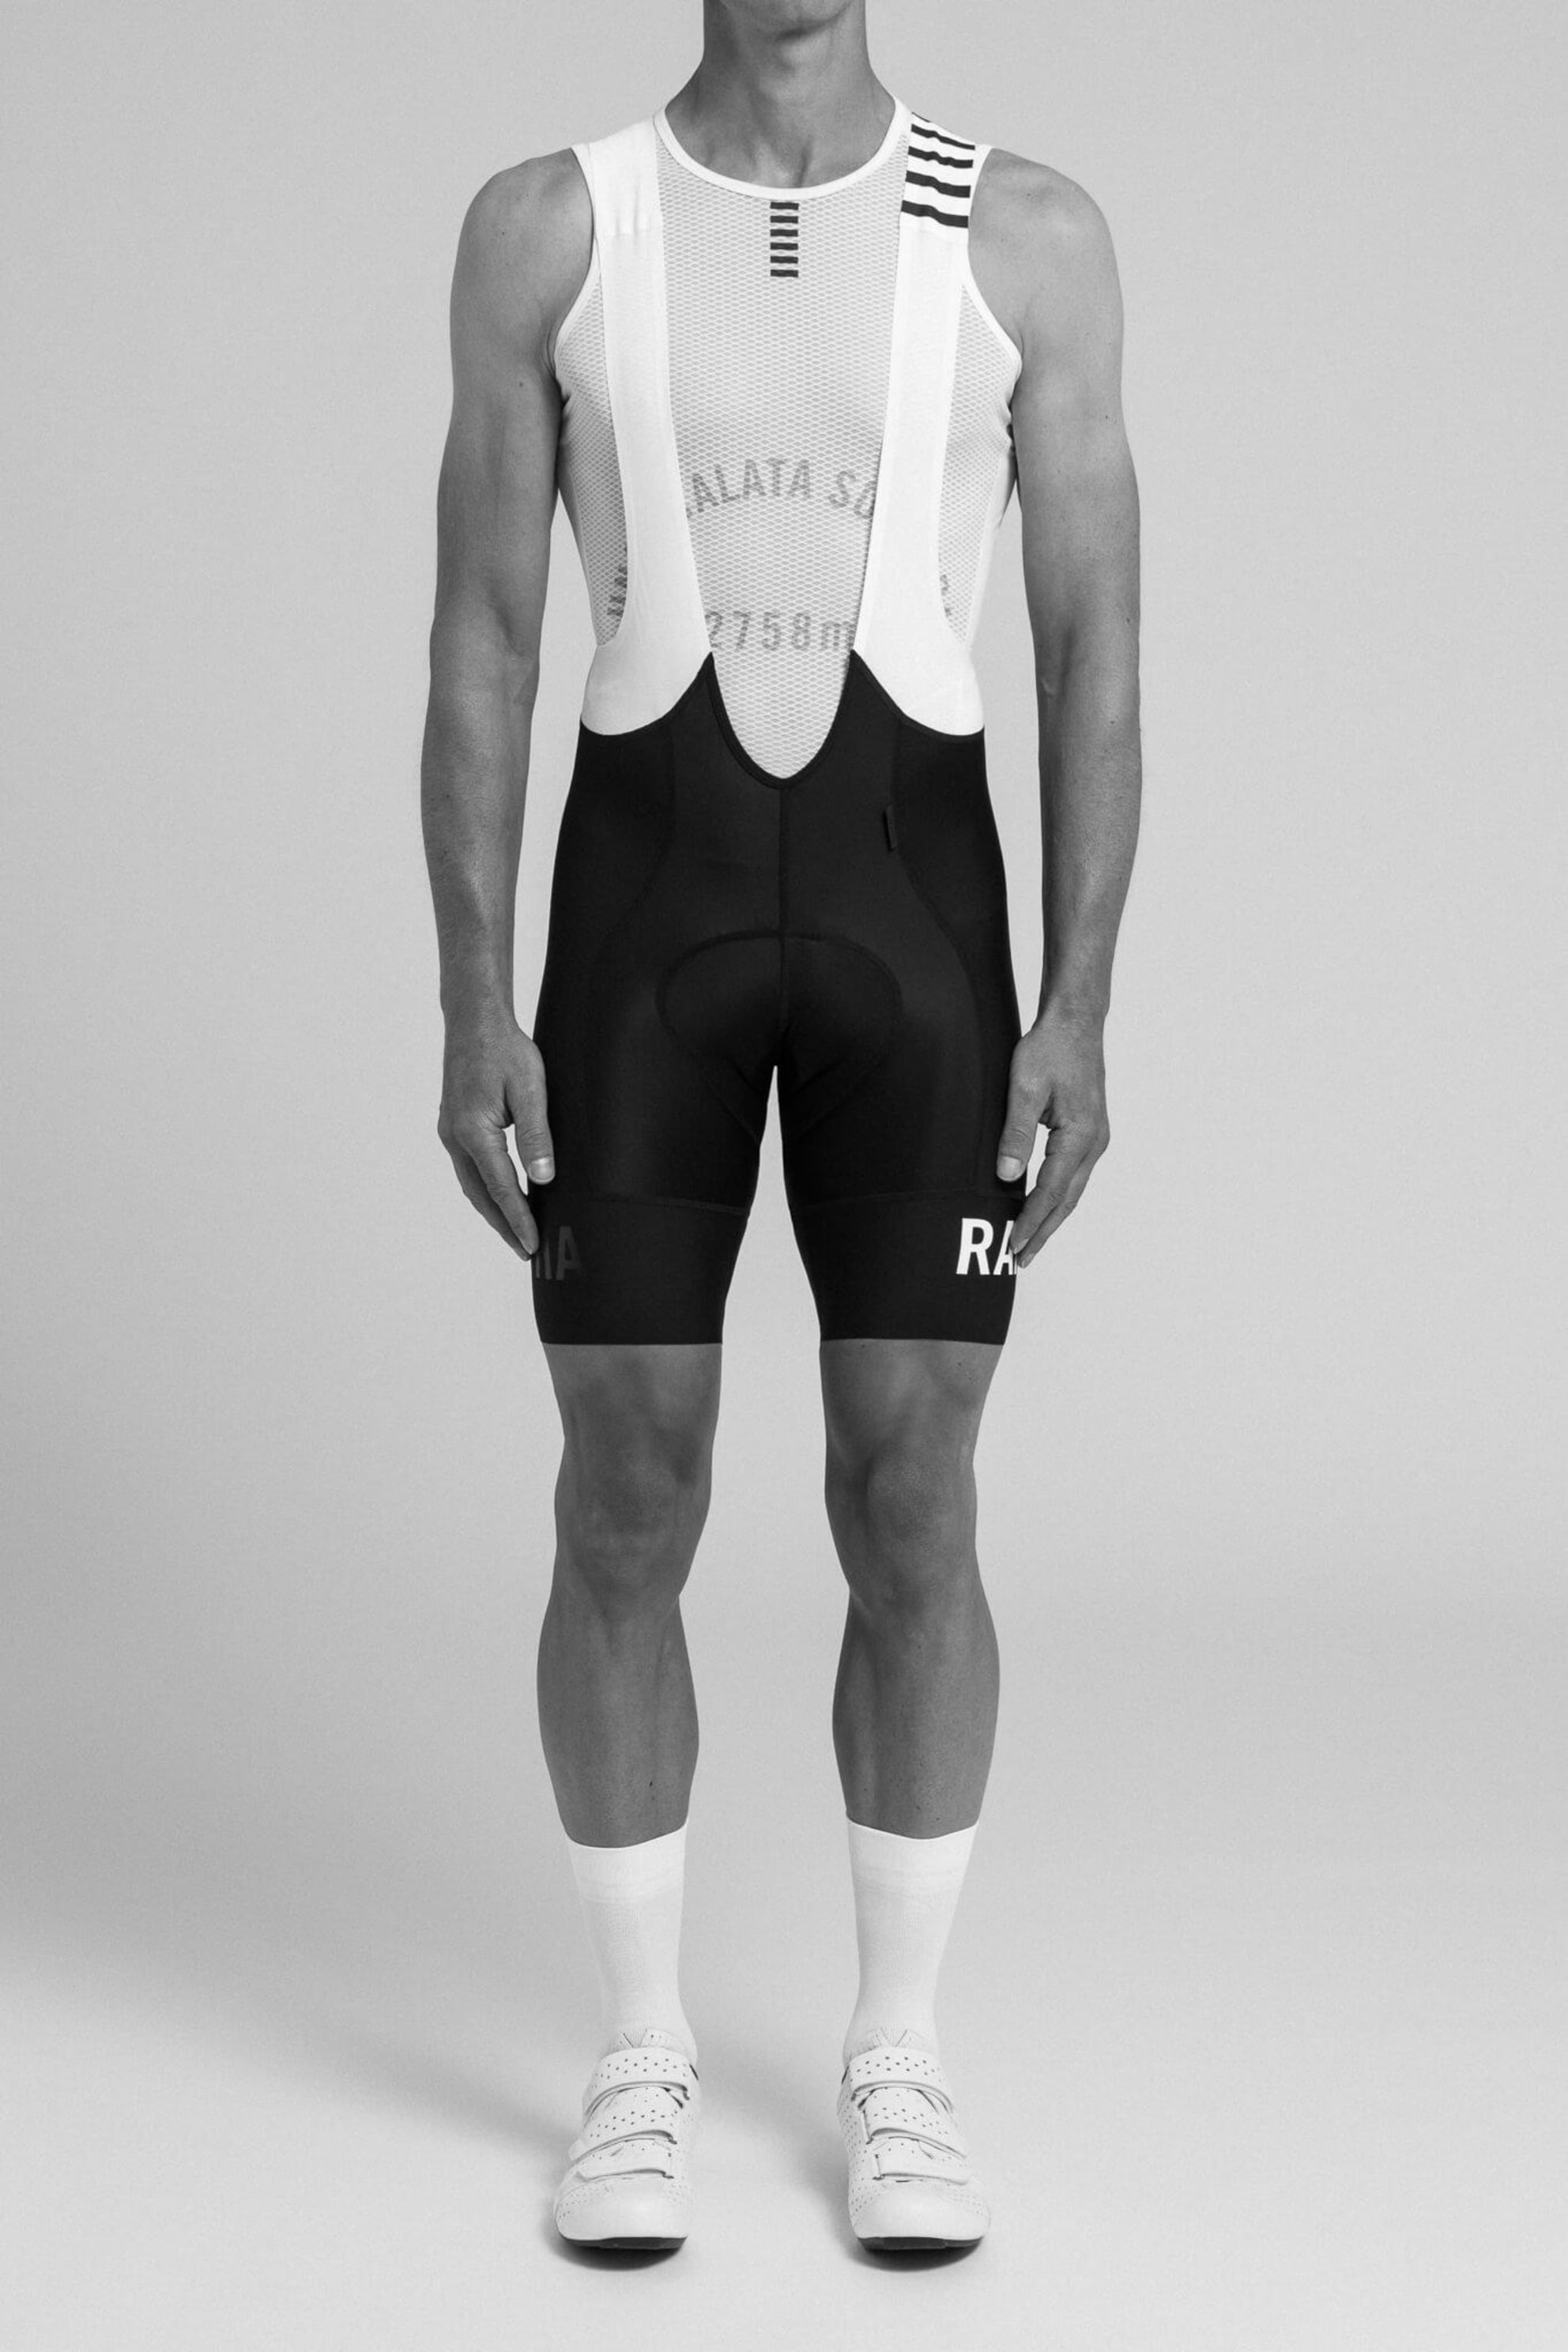 Men's Pro Team Winter Cycling Bib Shorts For Riding In Cold 